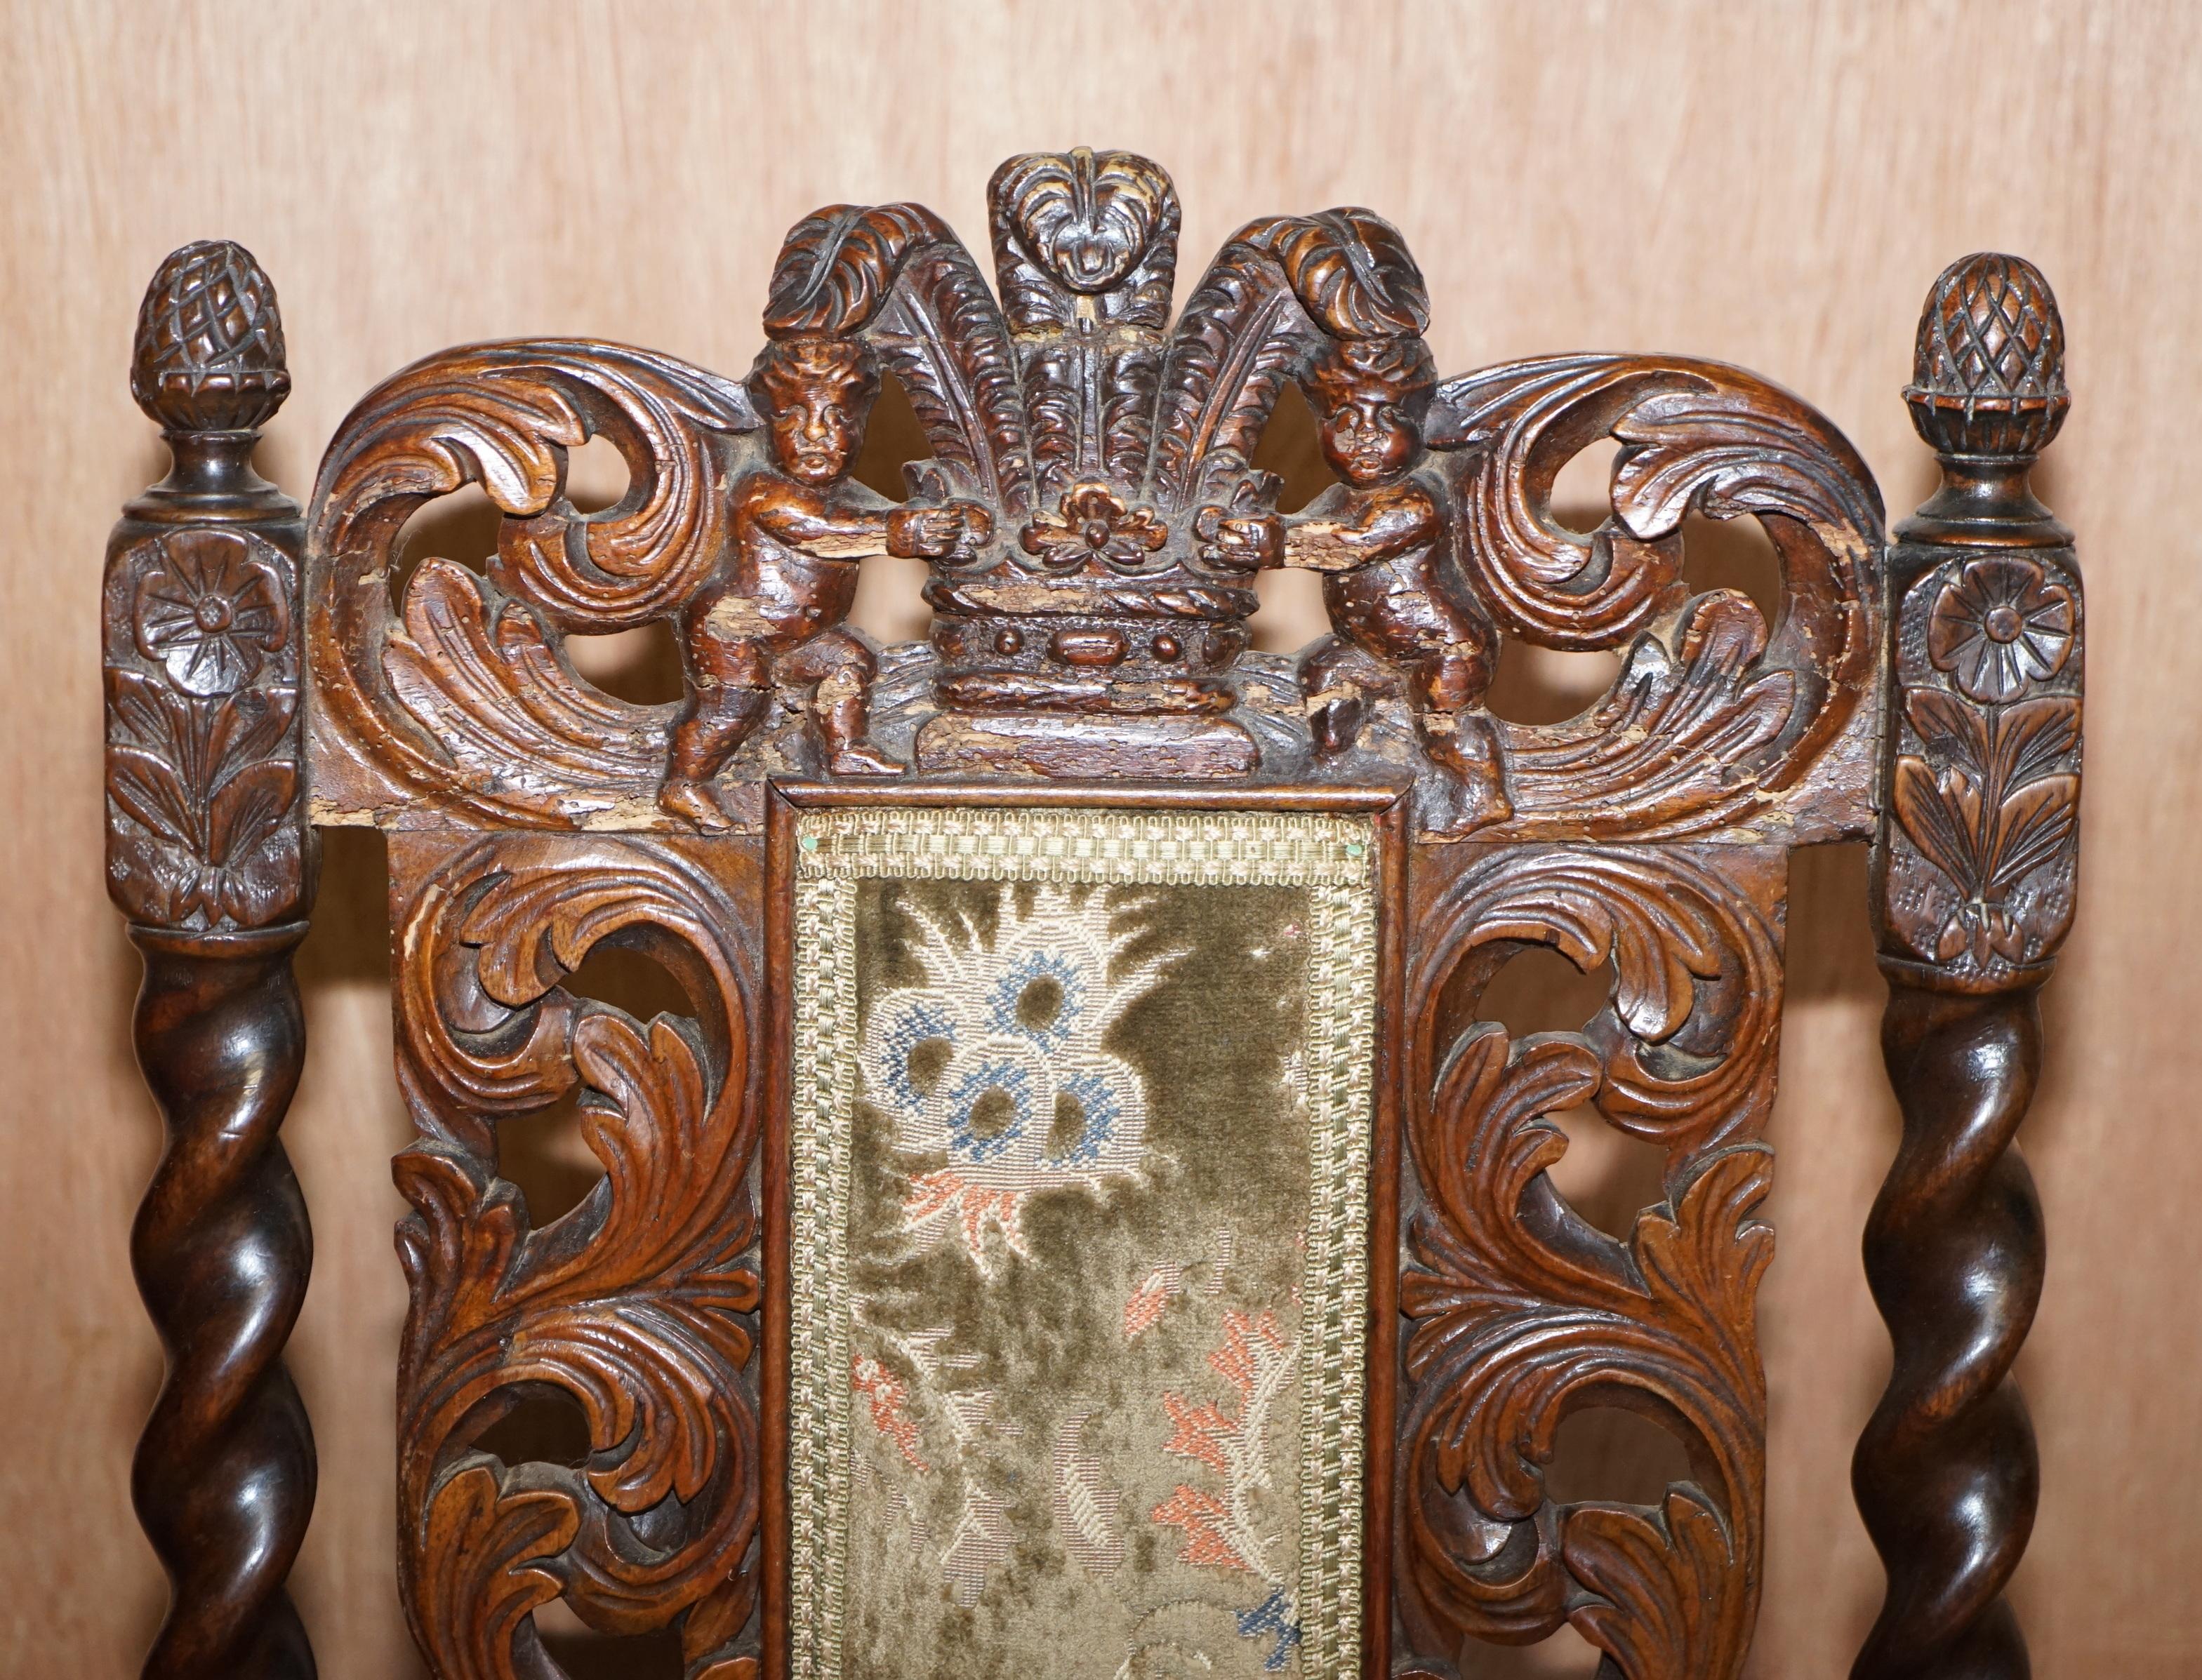 Pair of 18th Century Fruit Wood Carved Chair Cherubs Holding a Crown and Flowers For Sale 8